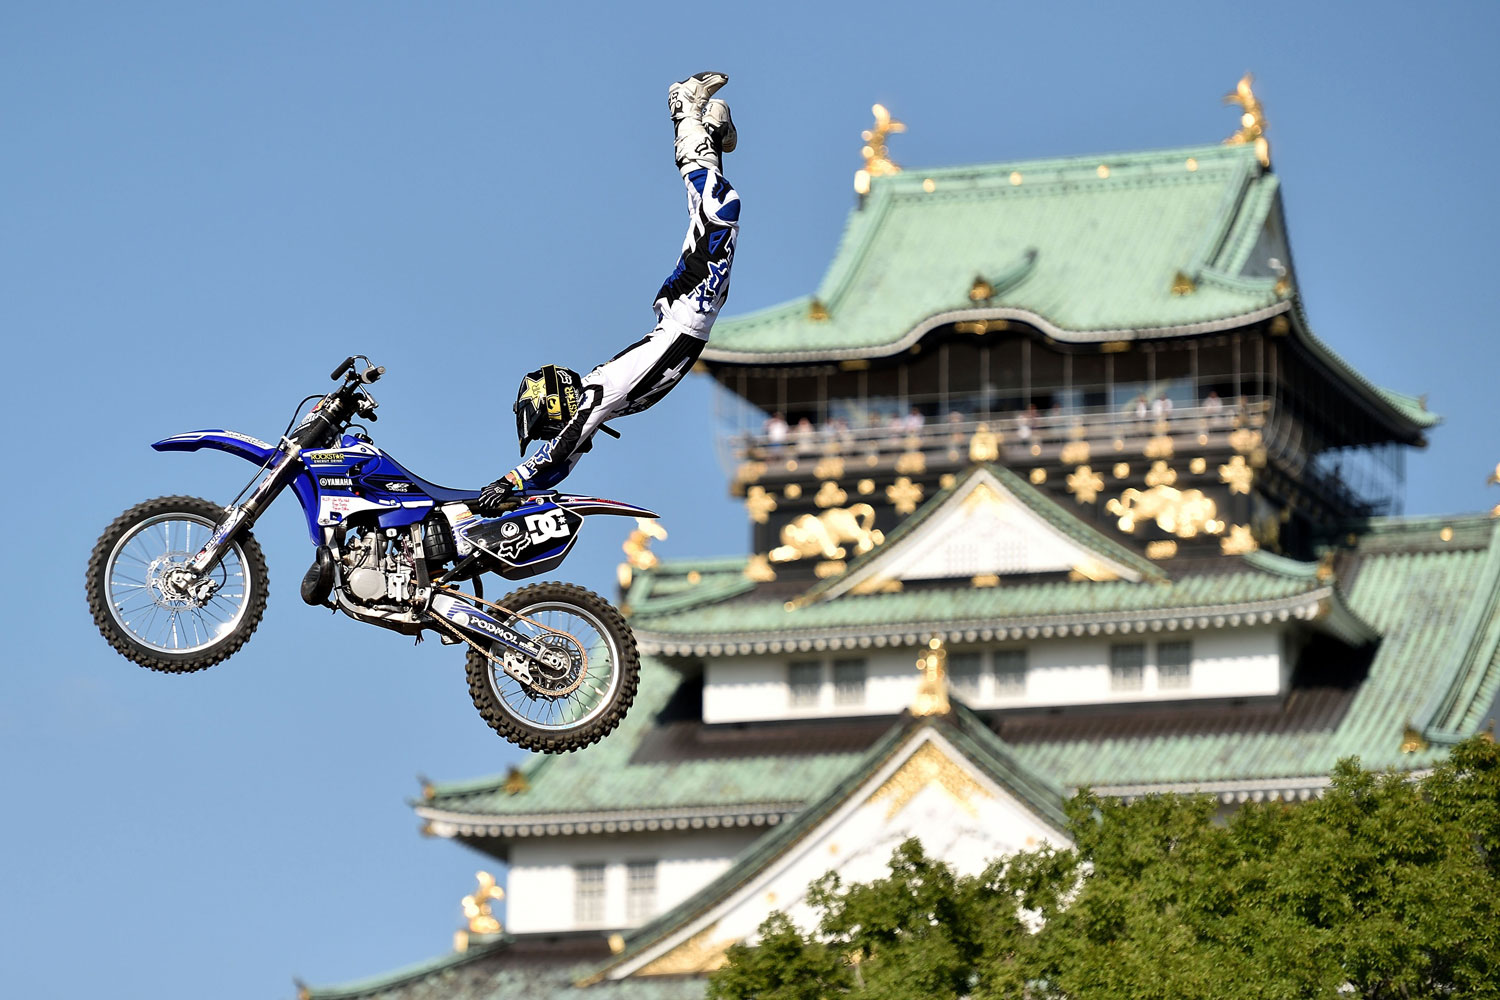 Red Bull XaA Red Bull X-Fighter rider during training for the Red Bull X-Fighters World Tour on May 23, 2014 in Osaka, Japan.-Fighters World Tour